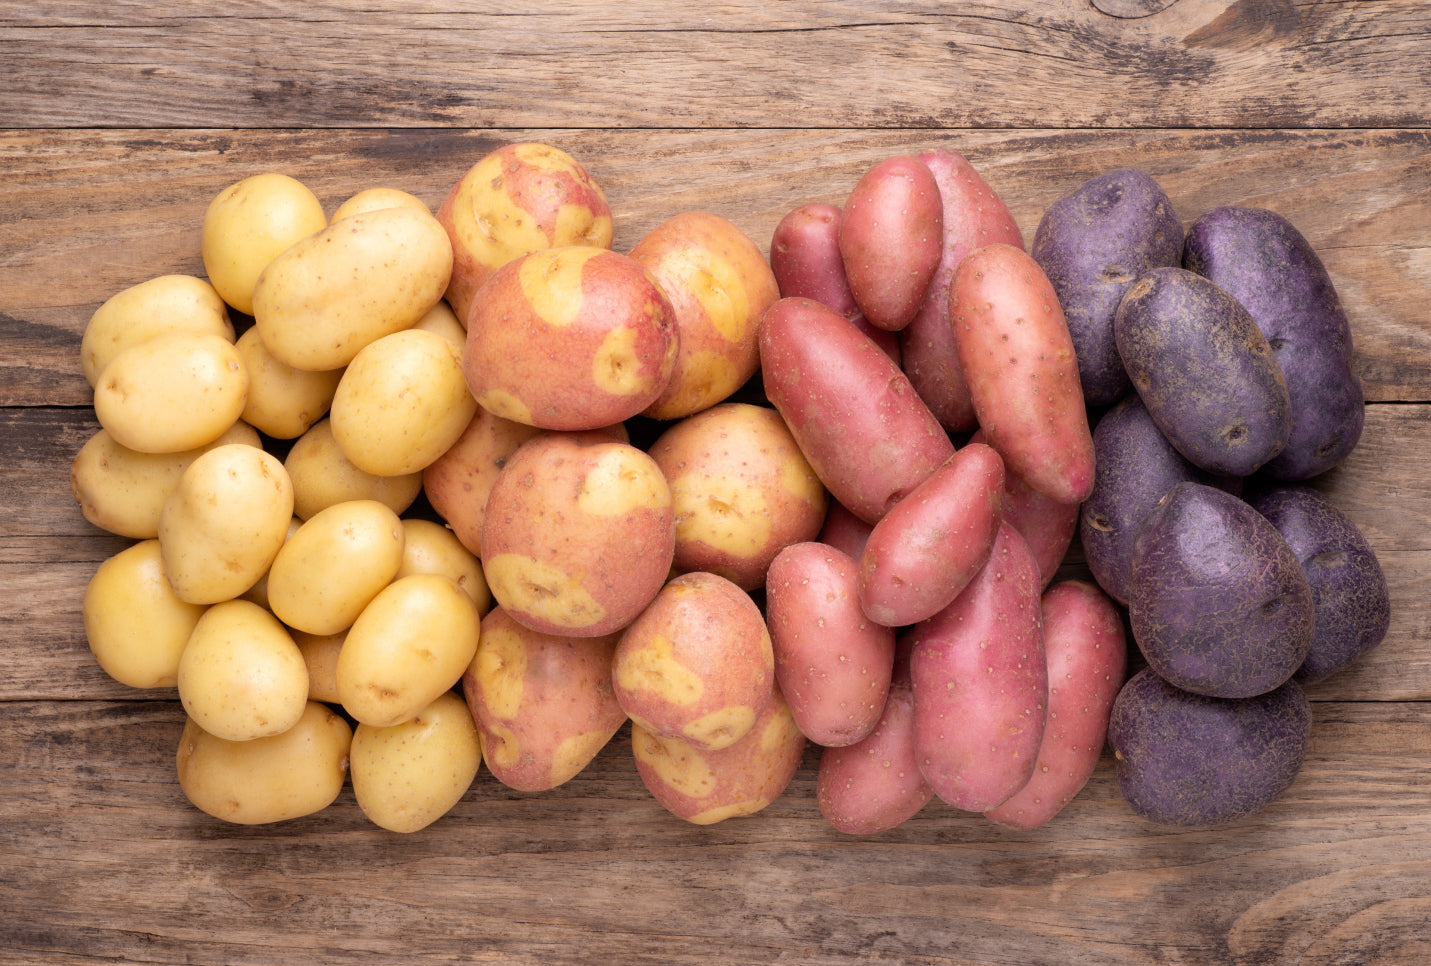 Can You Eat Potatoes on the Paleo Diet?